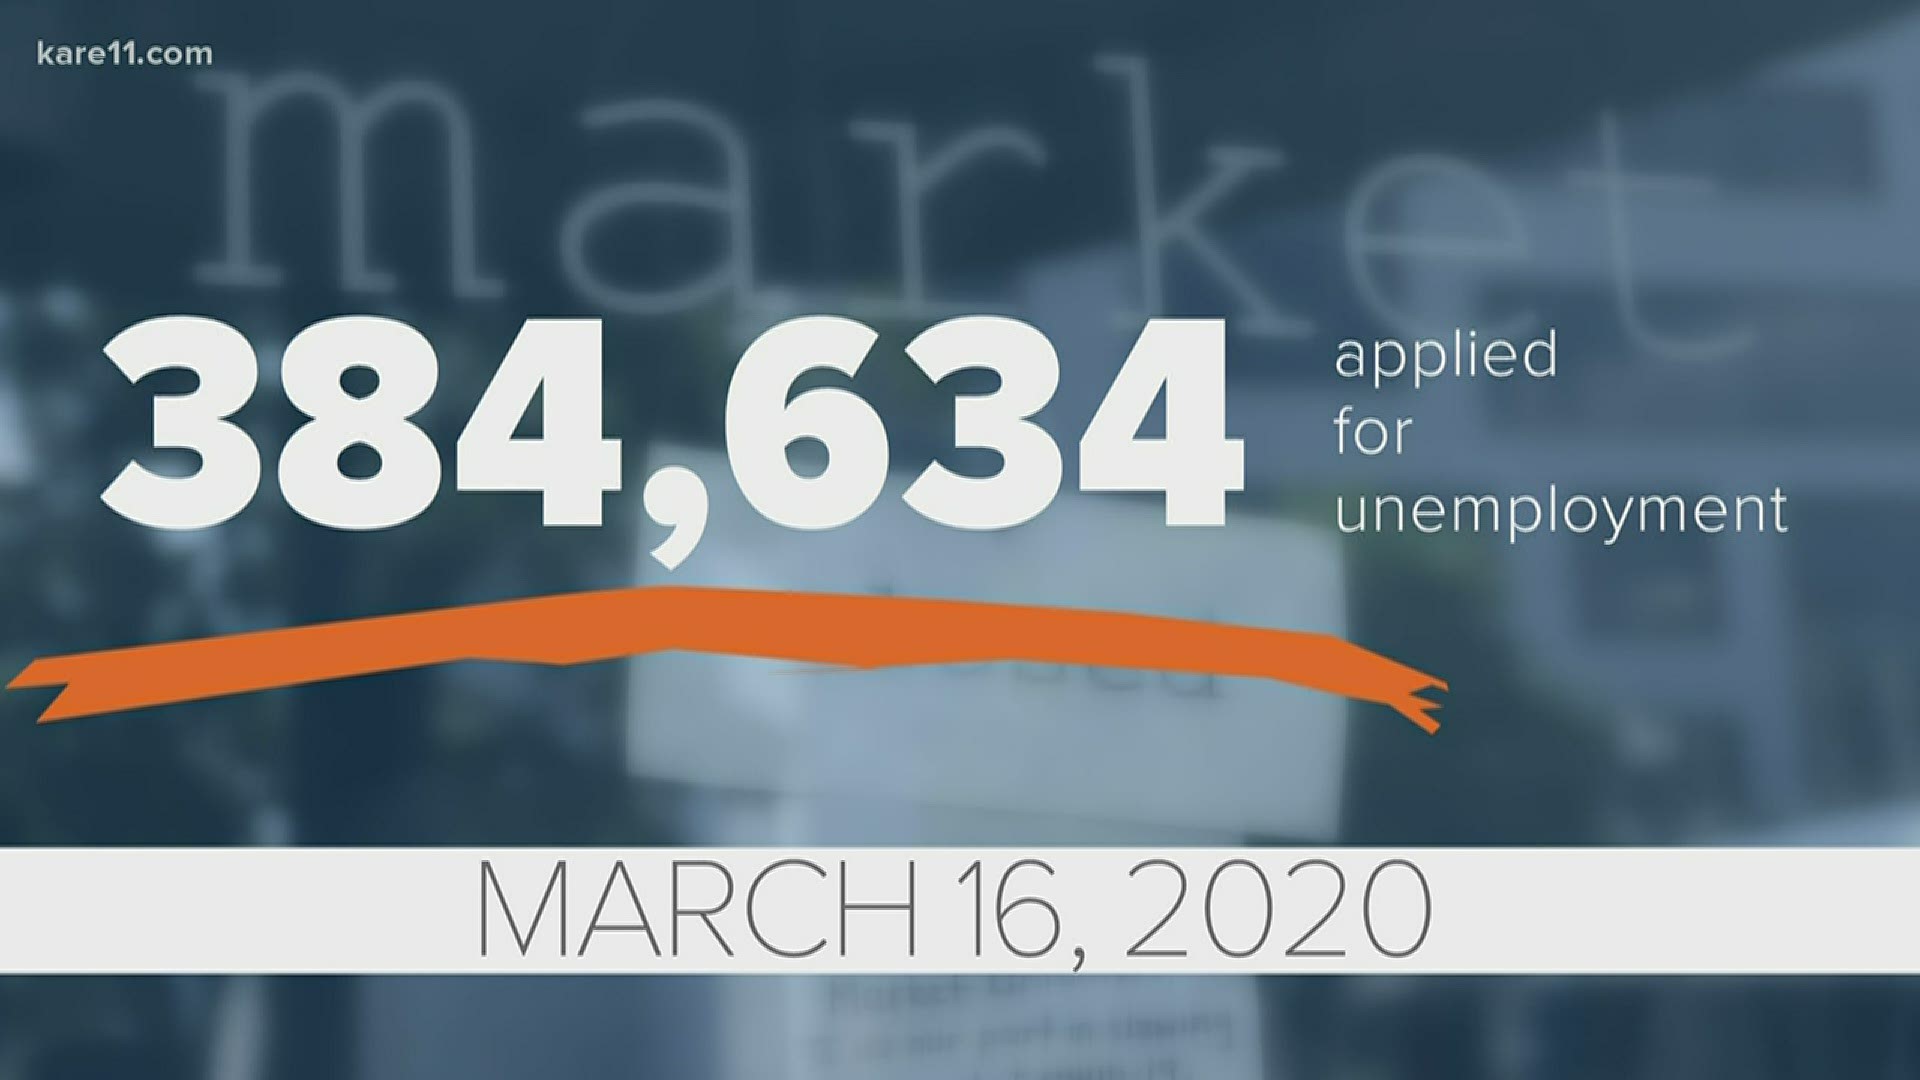 Since March 16, 384,634 Minnesotans applied for unemployment insurance. That's about the number of people who applied all of last year and growing.